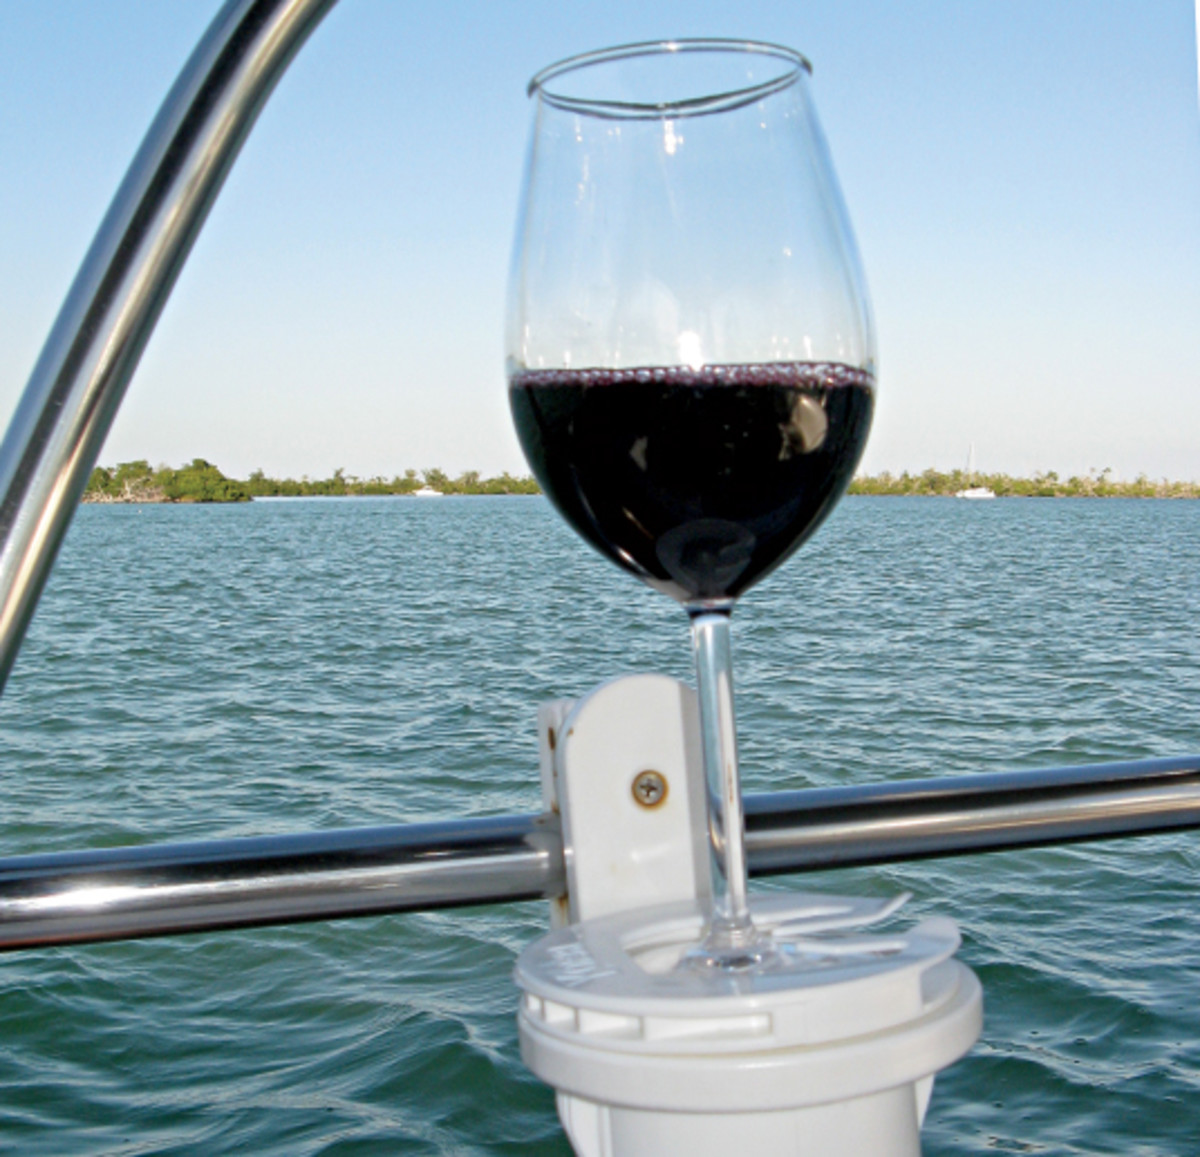 A boat’s motion will help age young wine